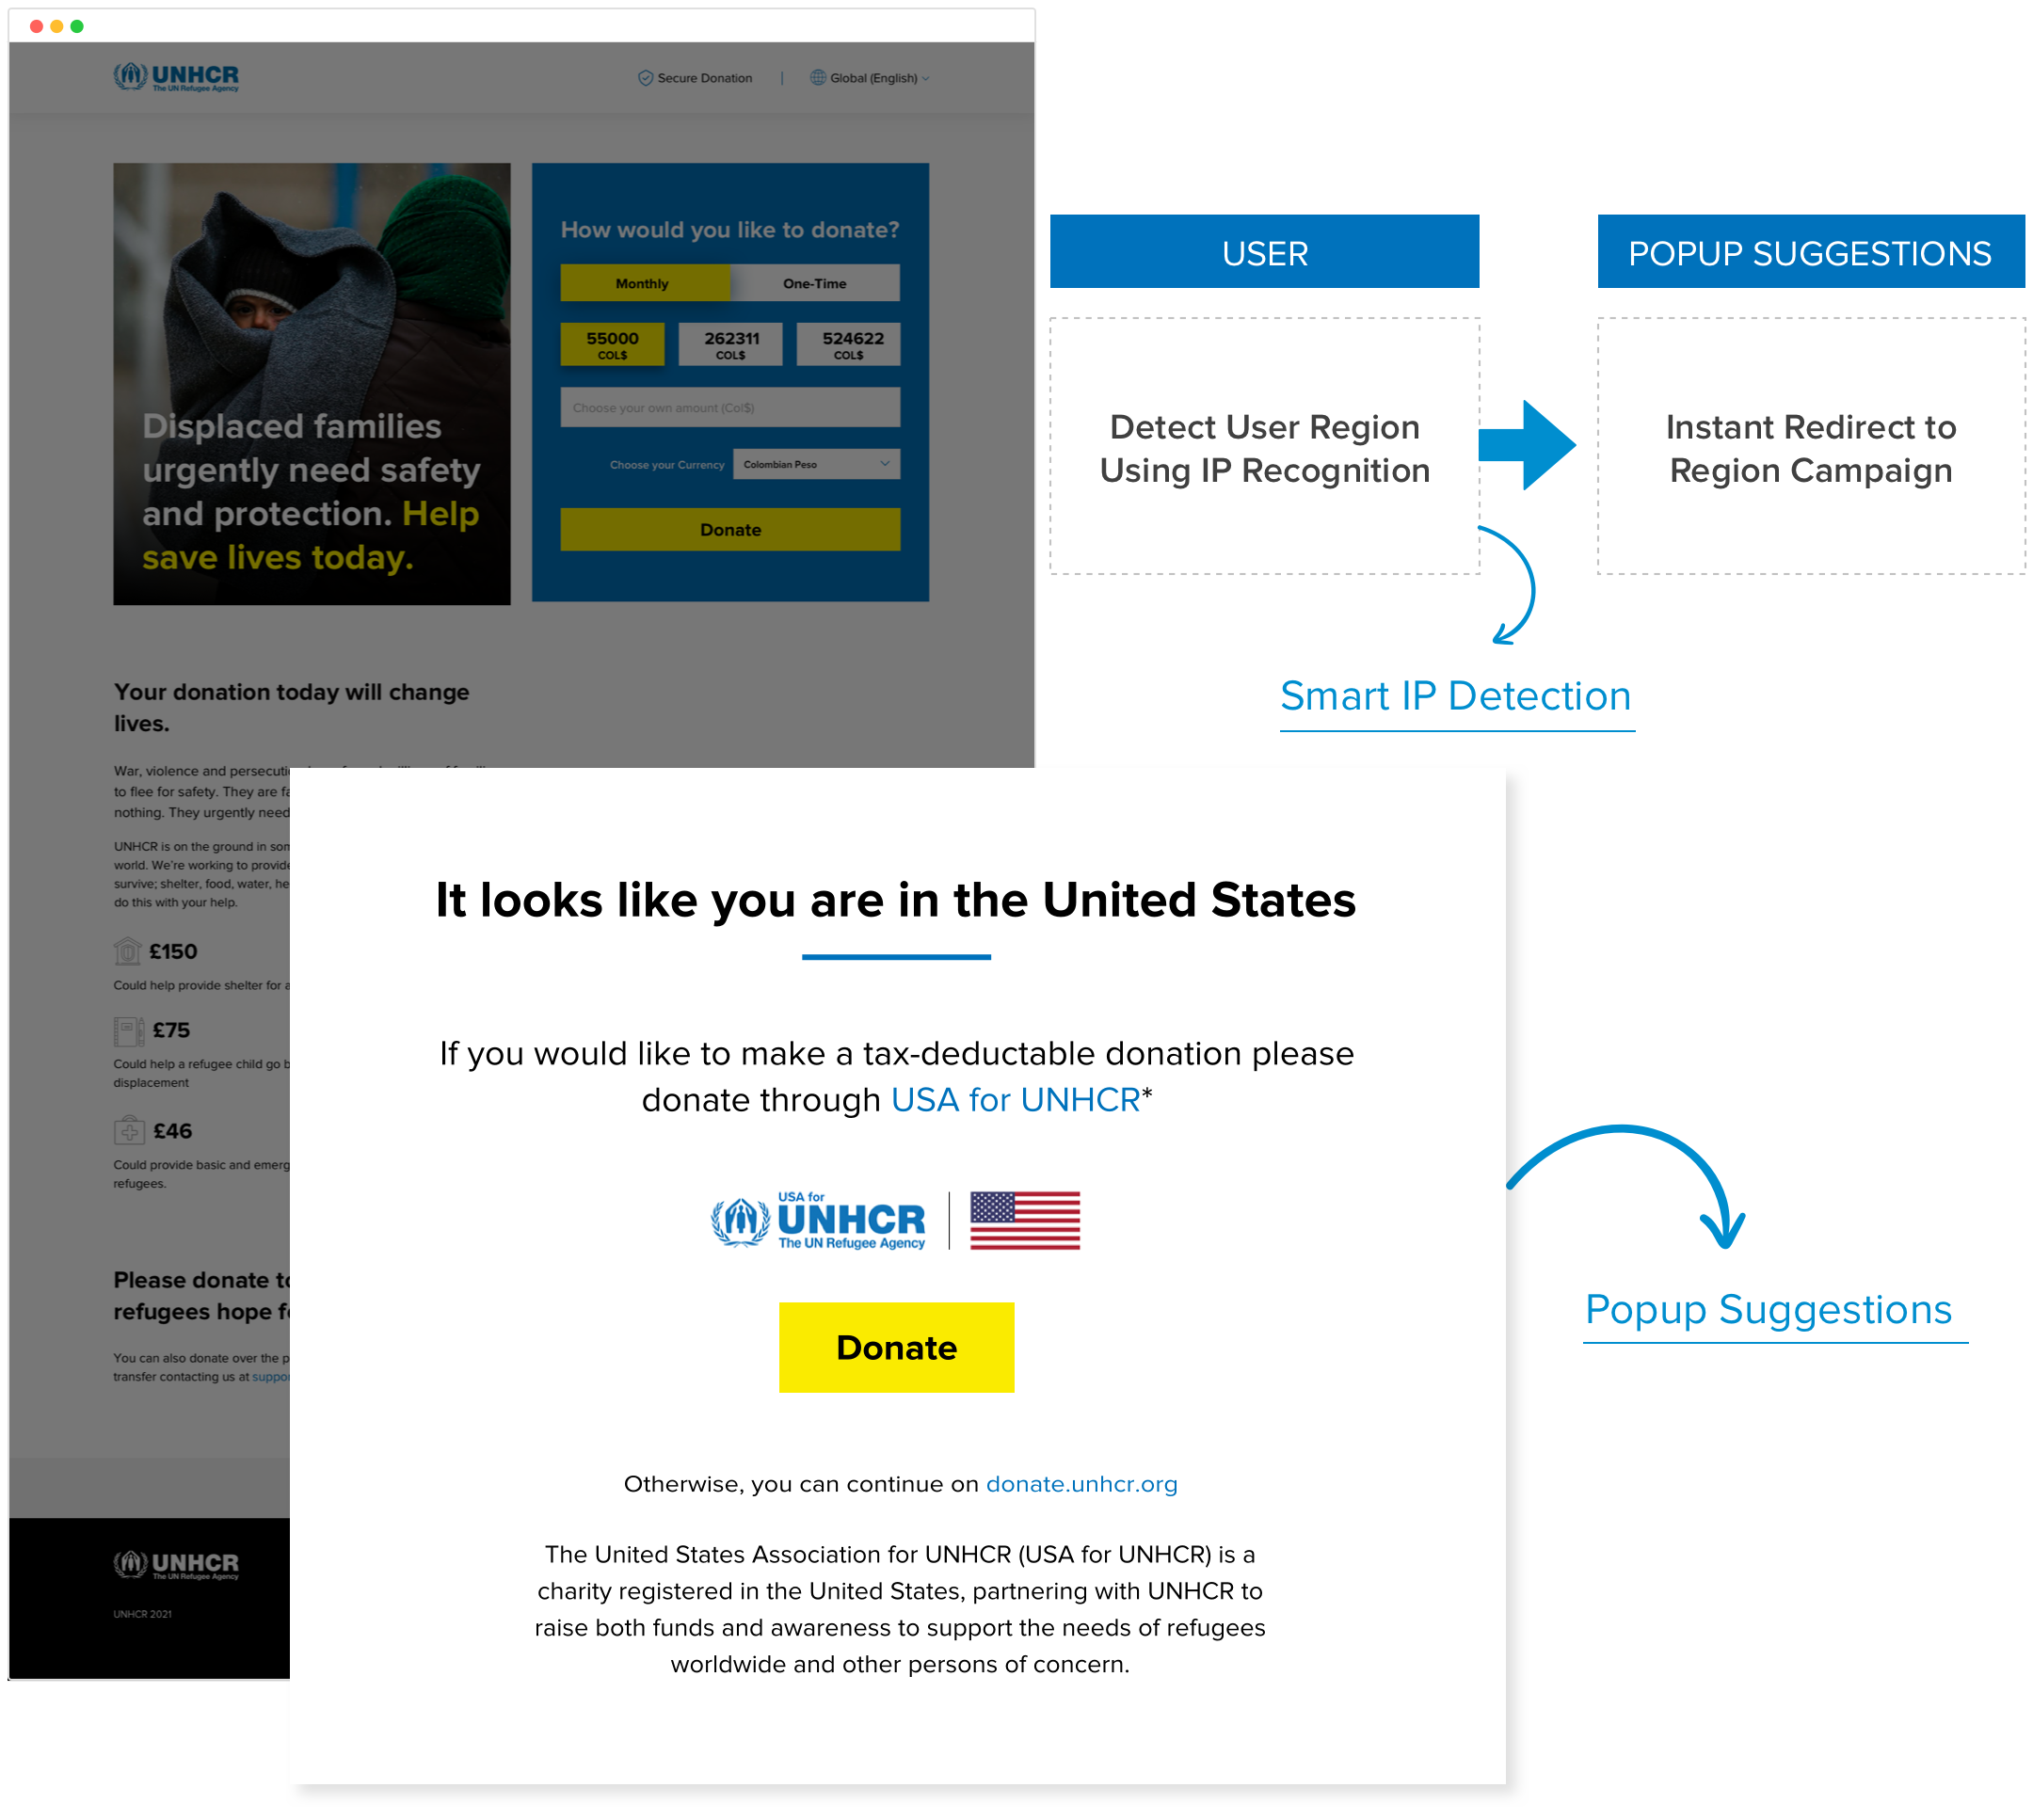 UNHCR Hard and popup suggestions 